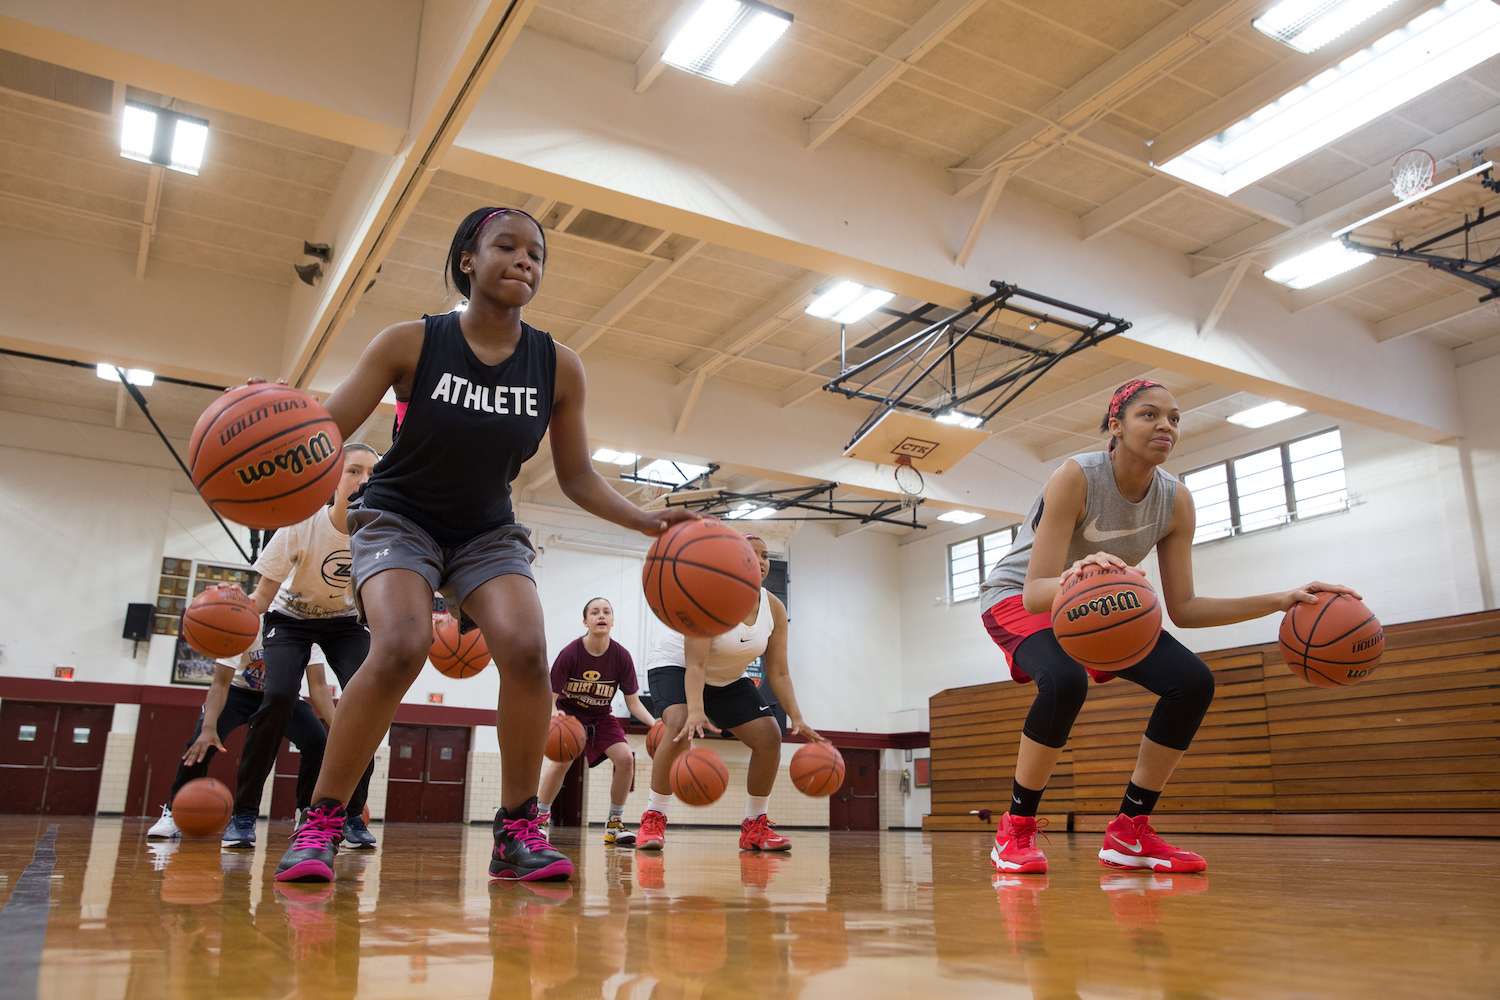 How To Build Confidence In Basketball